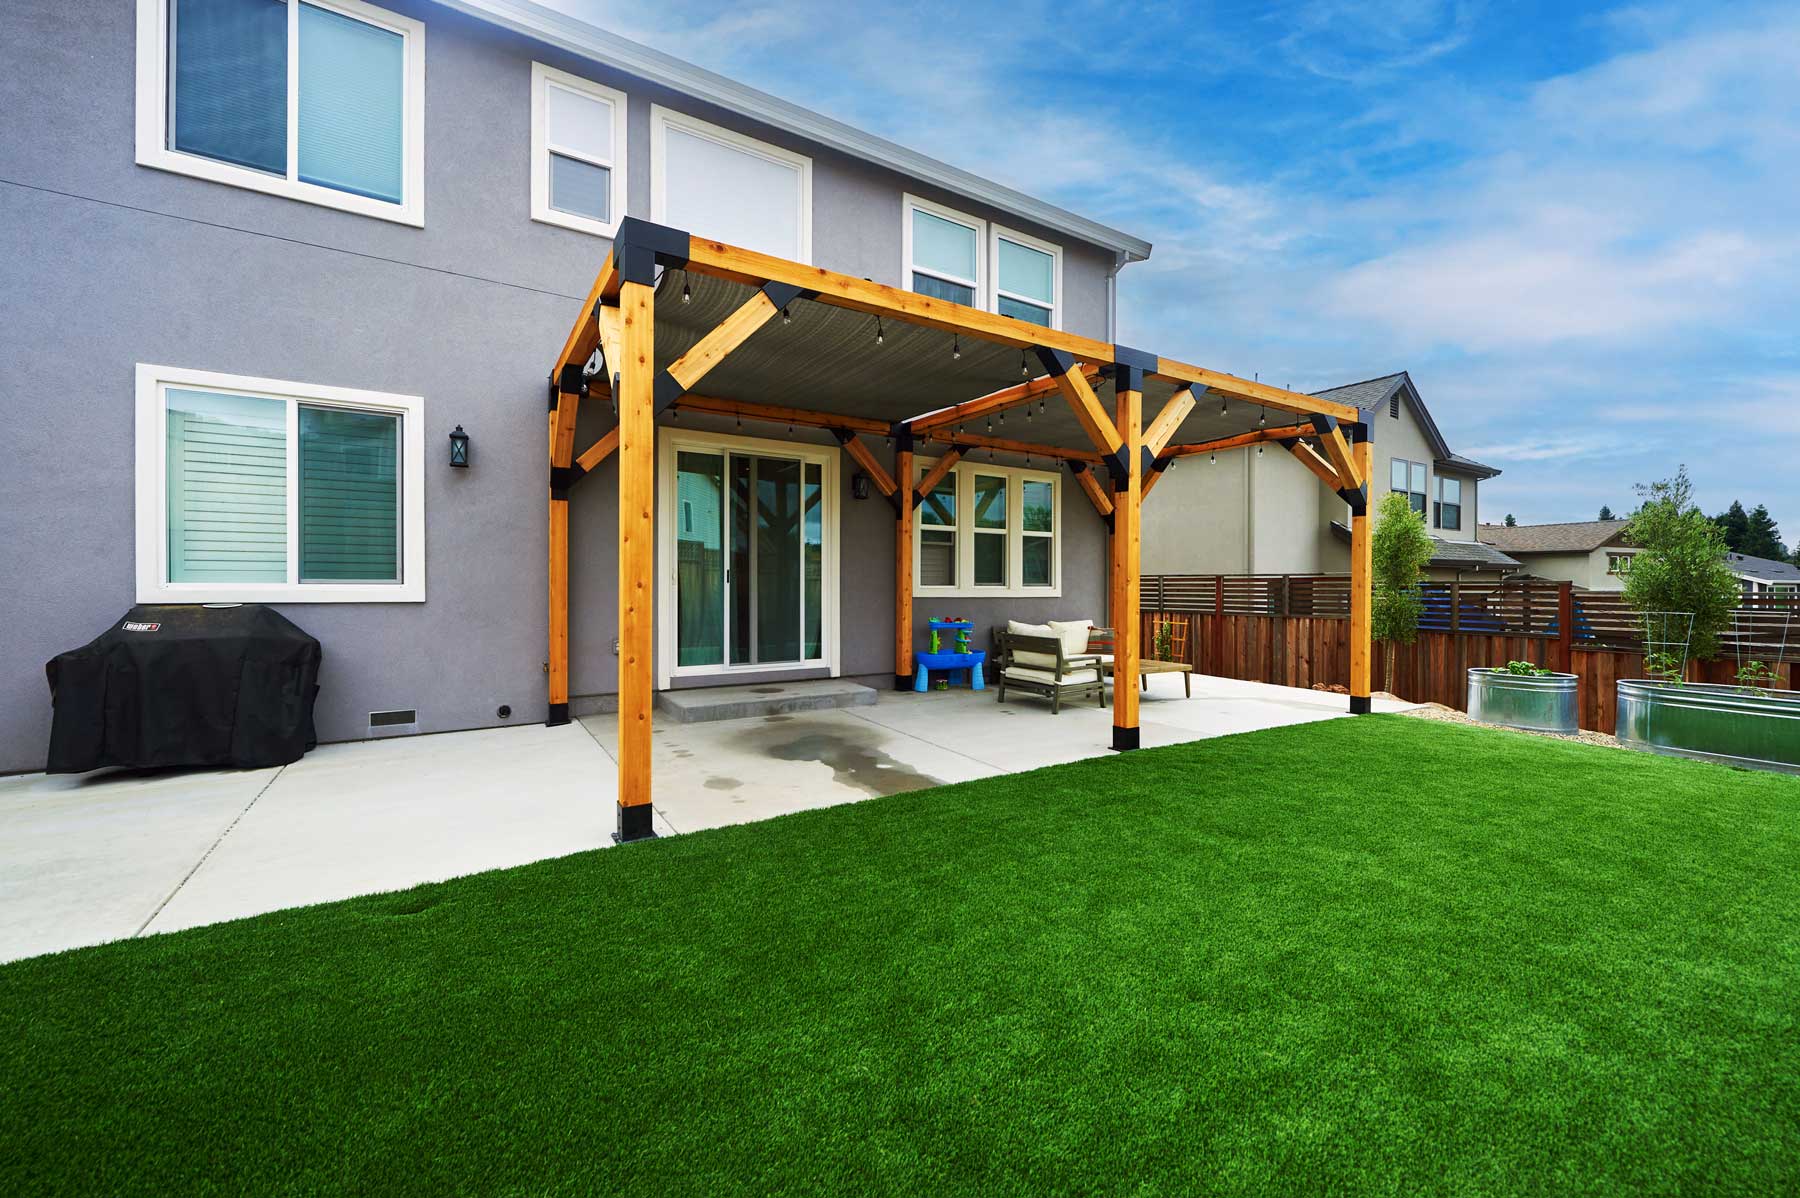 Artificial Lawn Installation | Northview Landscaping